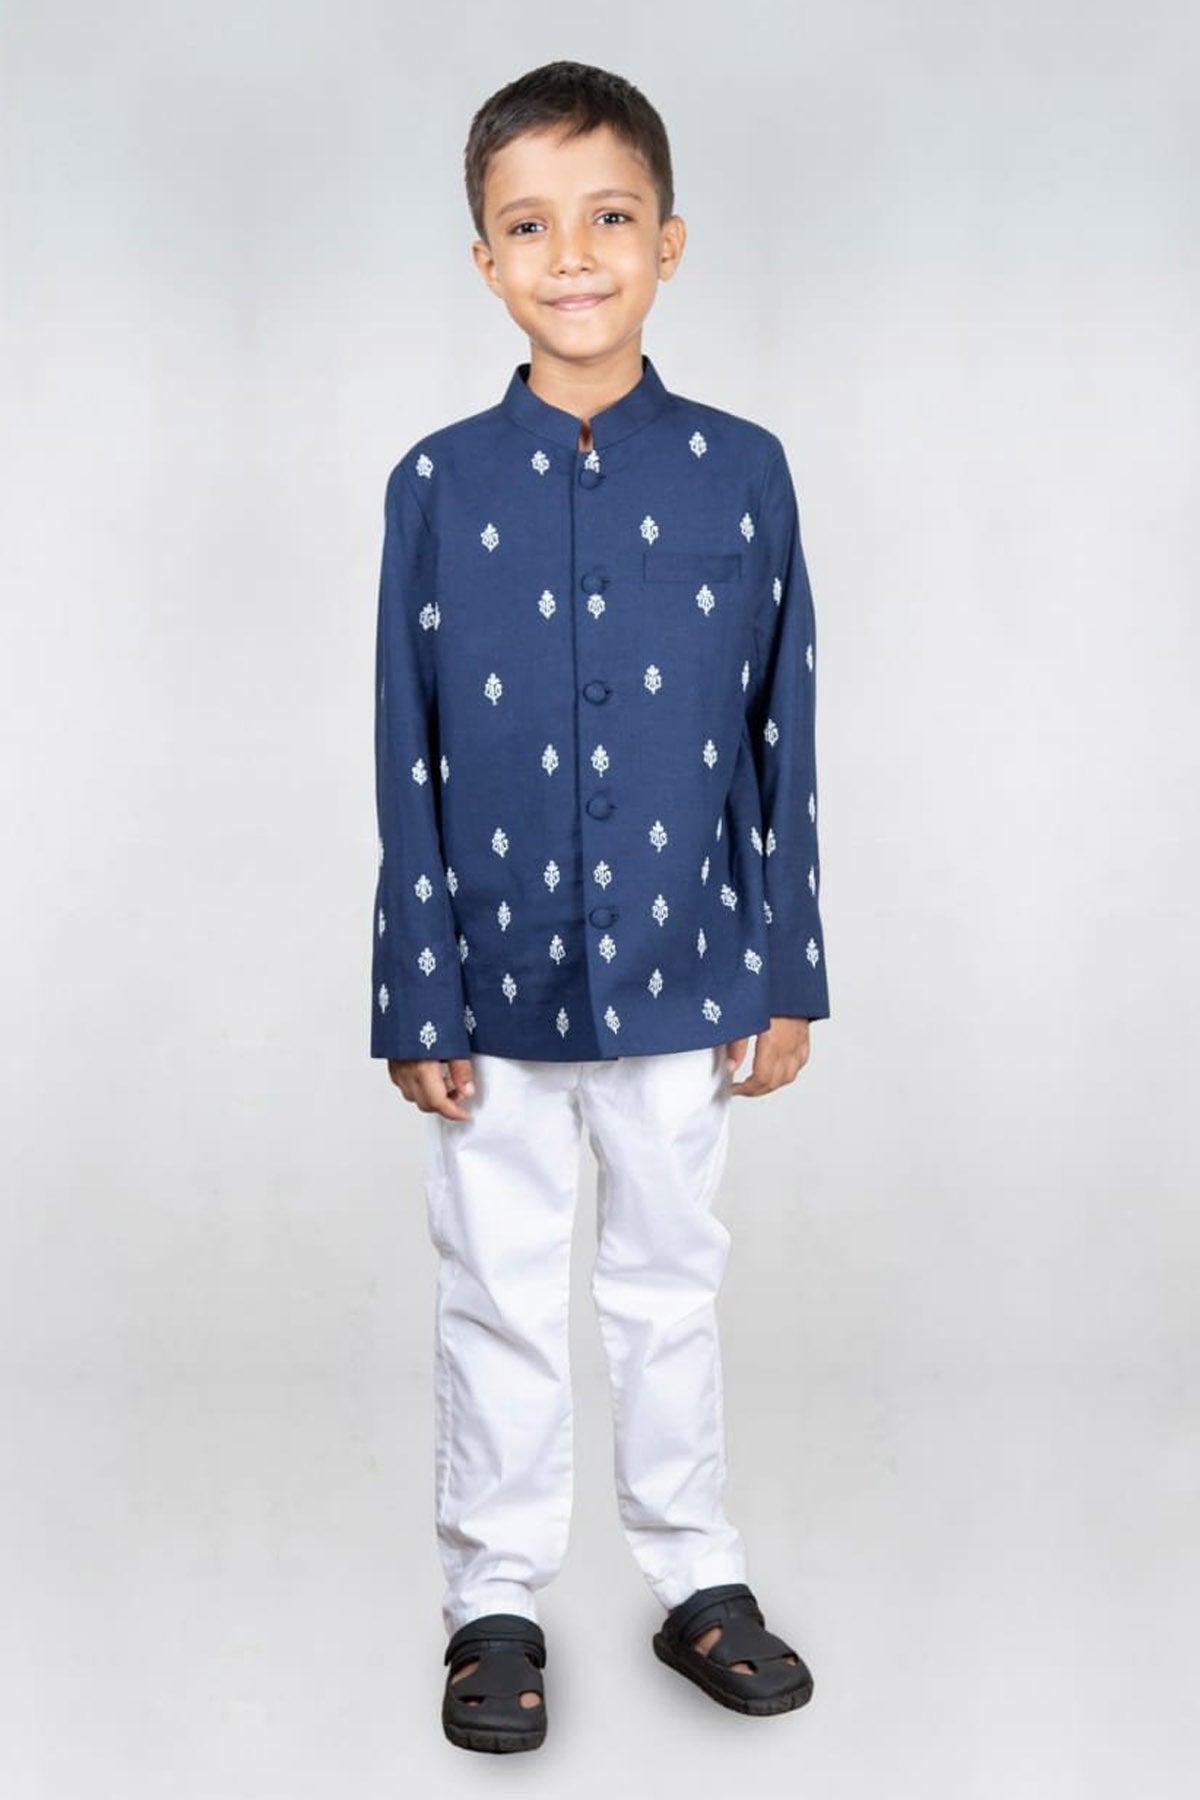 Designer Little Brats Boota Embroidered Suit For Kids Available online at ScrollnShops